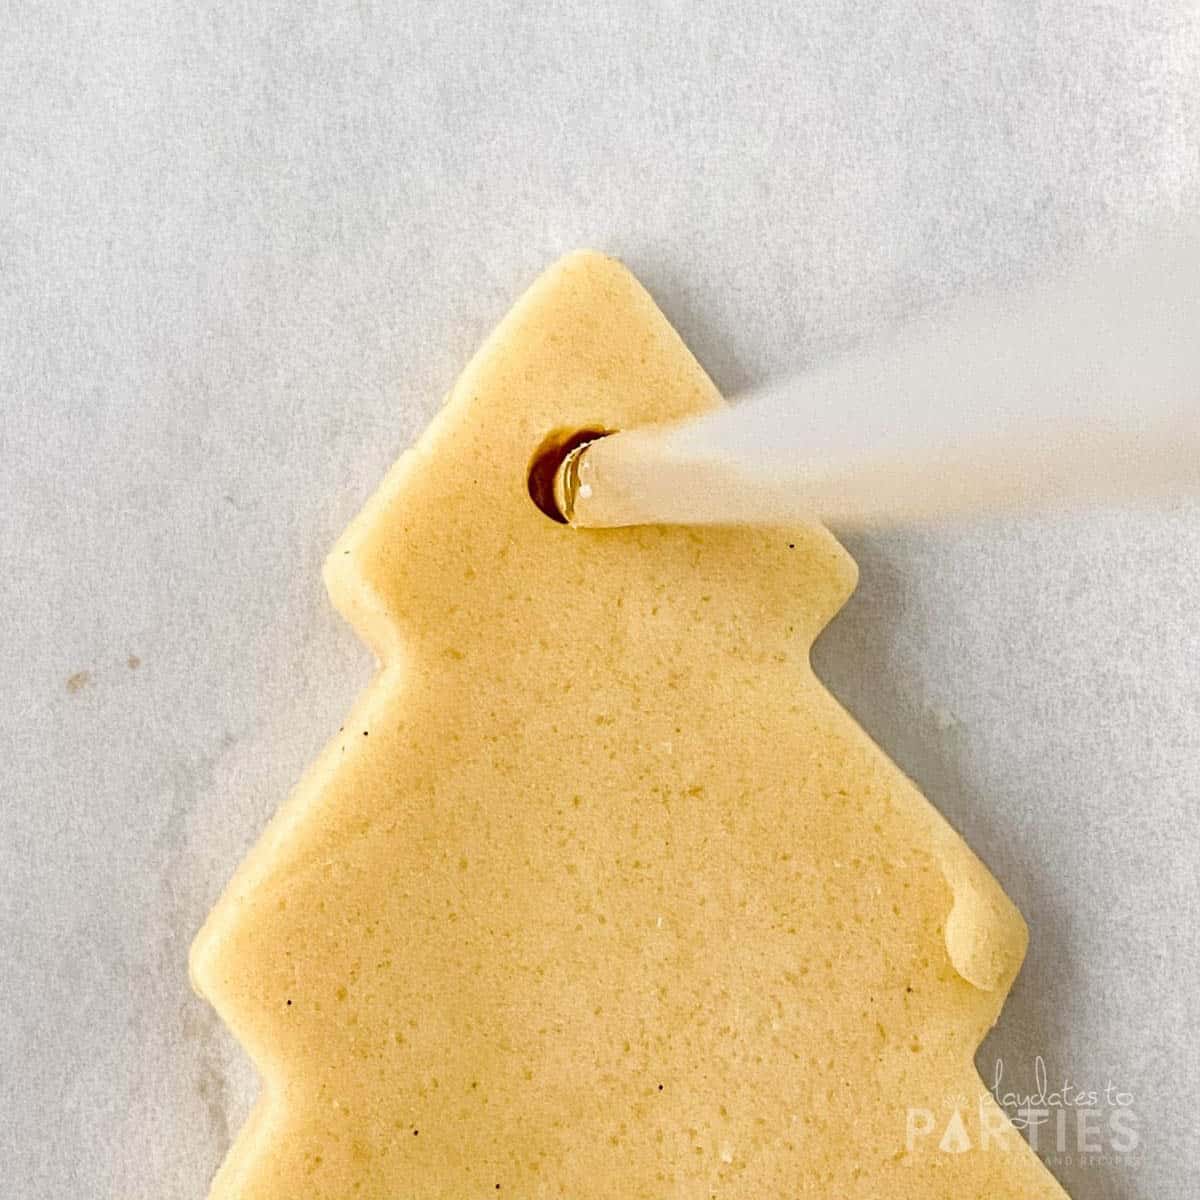 Making a hole in the cookie dough.